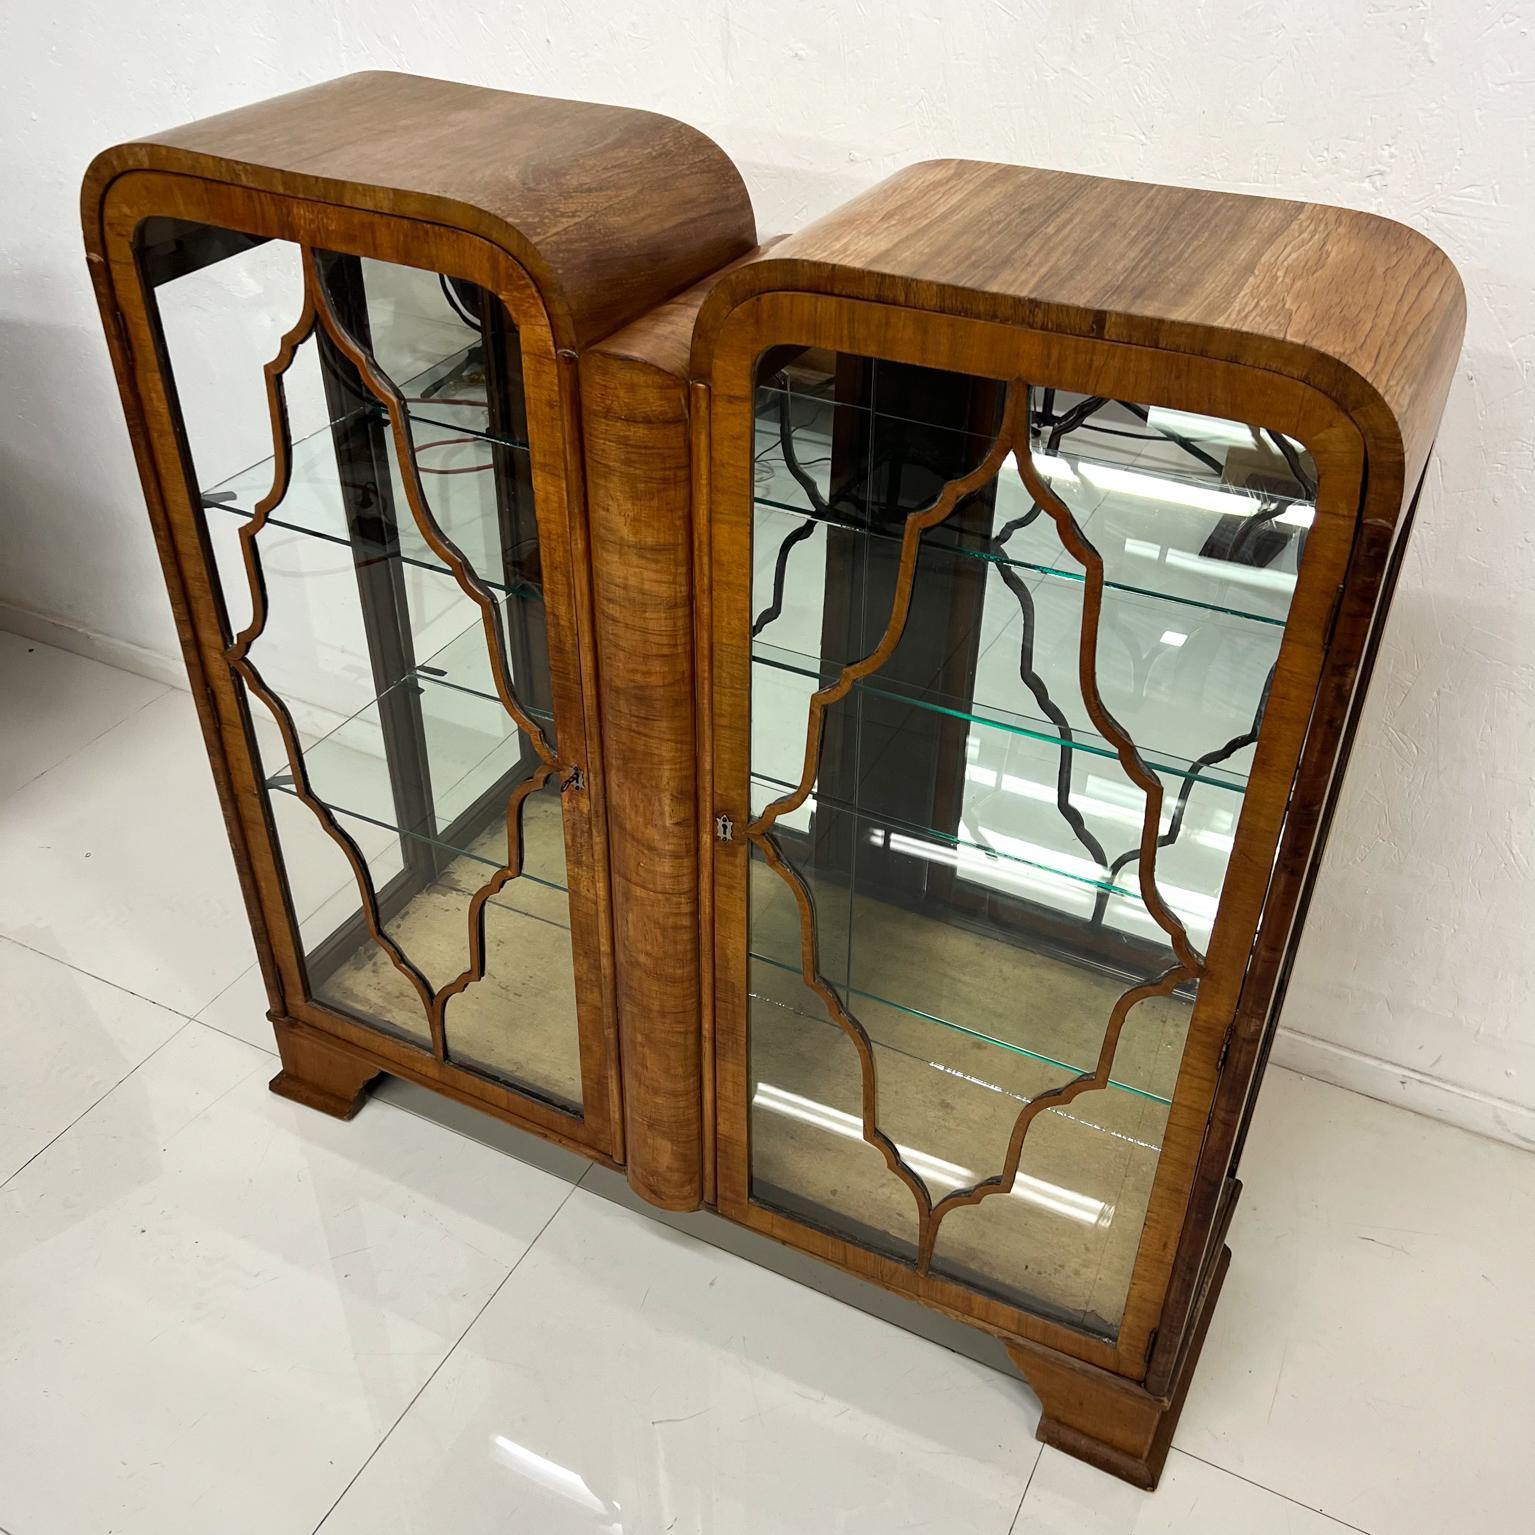 1930s Art Deco Vitrine Display Cabinet Sculptural Exotic Wood Glass Shelving In Good Condition For Sale In Chula Vista, CA